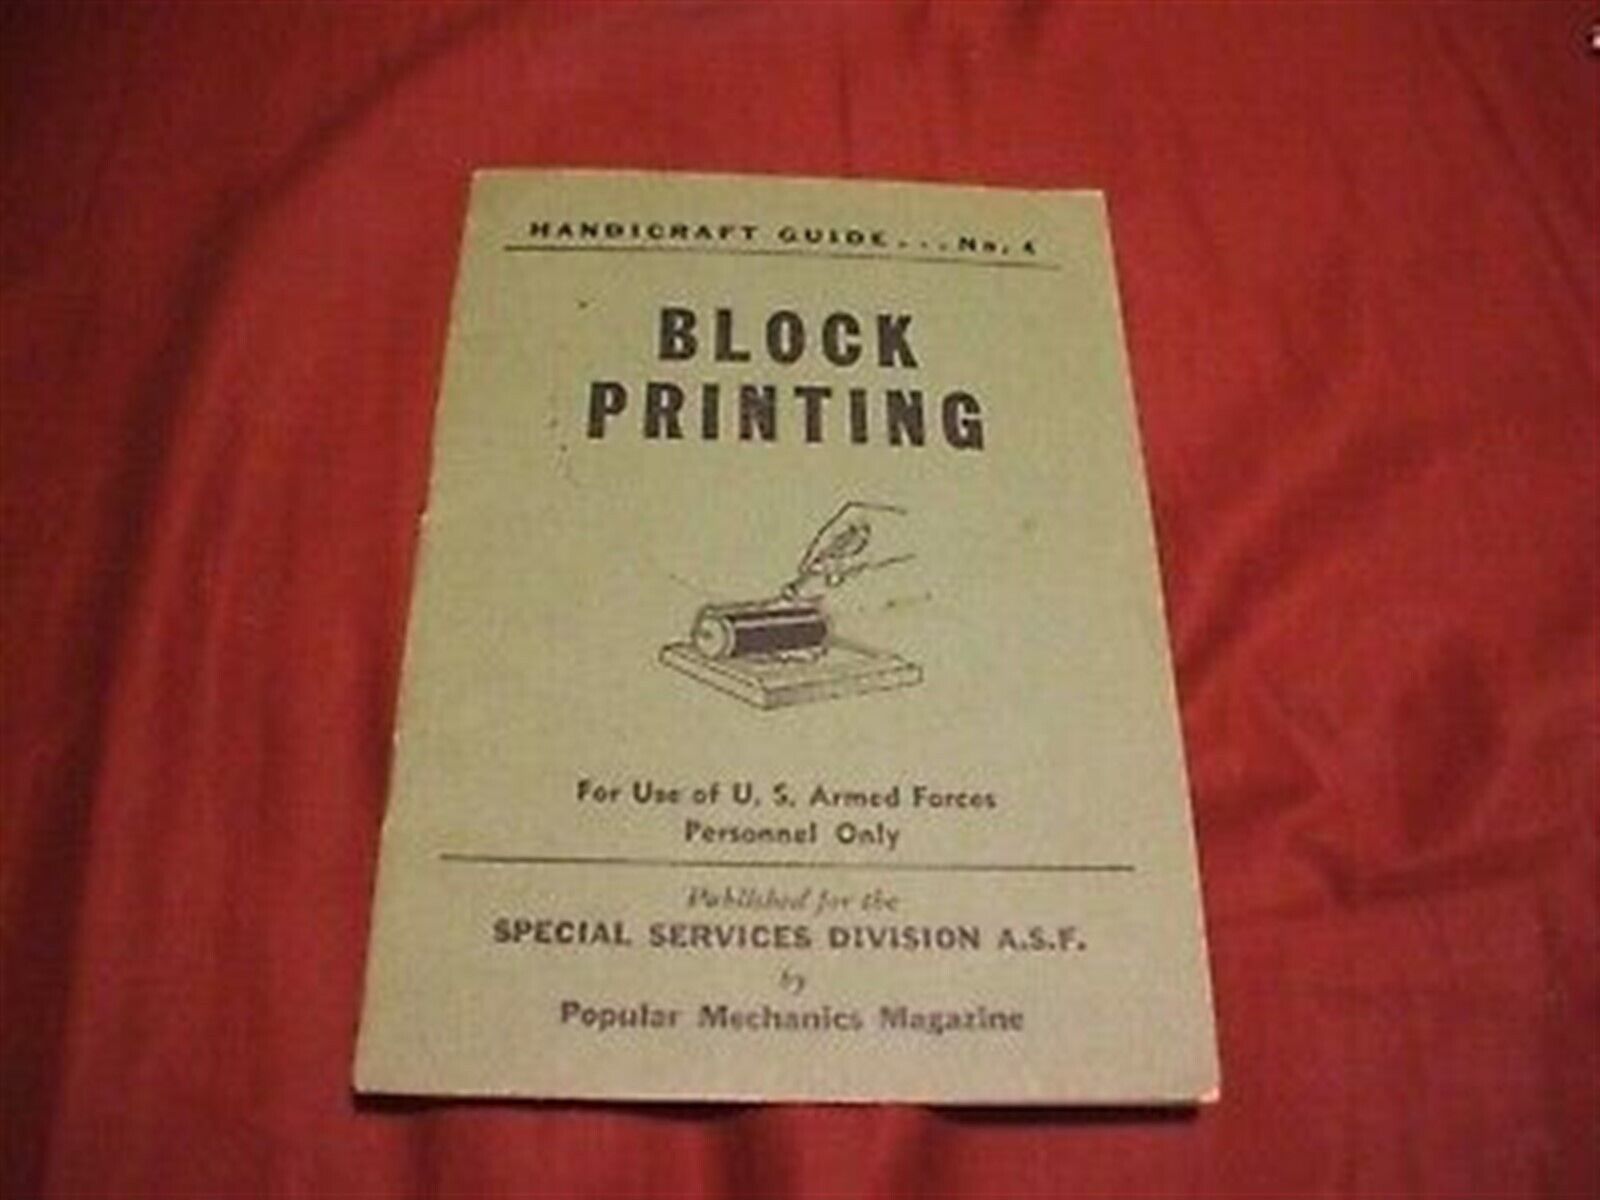 UNDATED BLOCK PRINTING - U.S. ARMED FORCES PERSONNEL ONLY - HANDICRAFT Guide